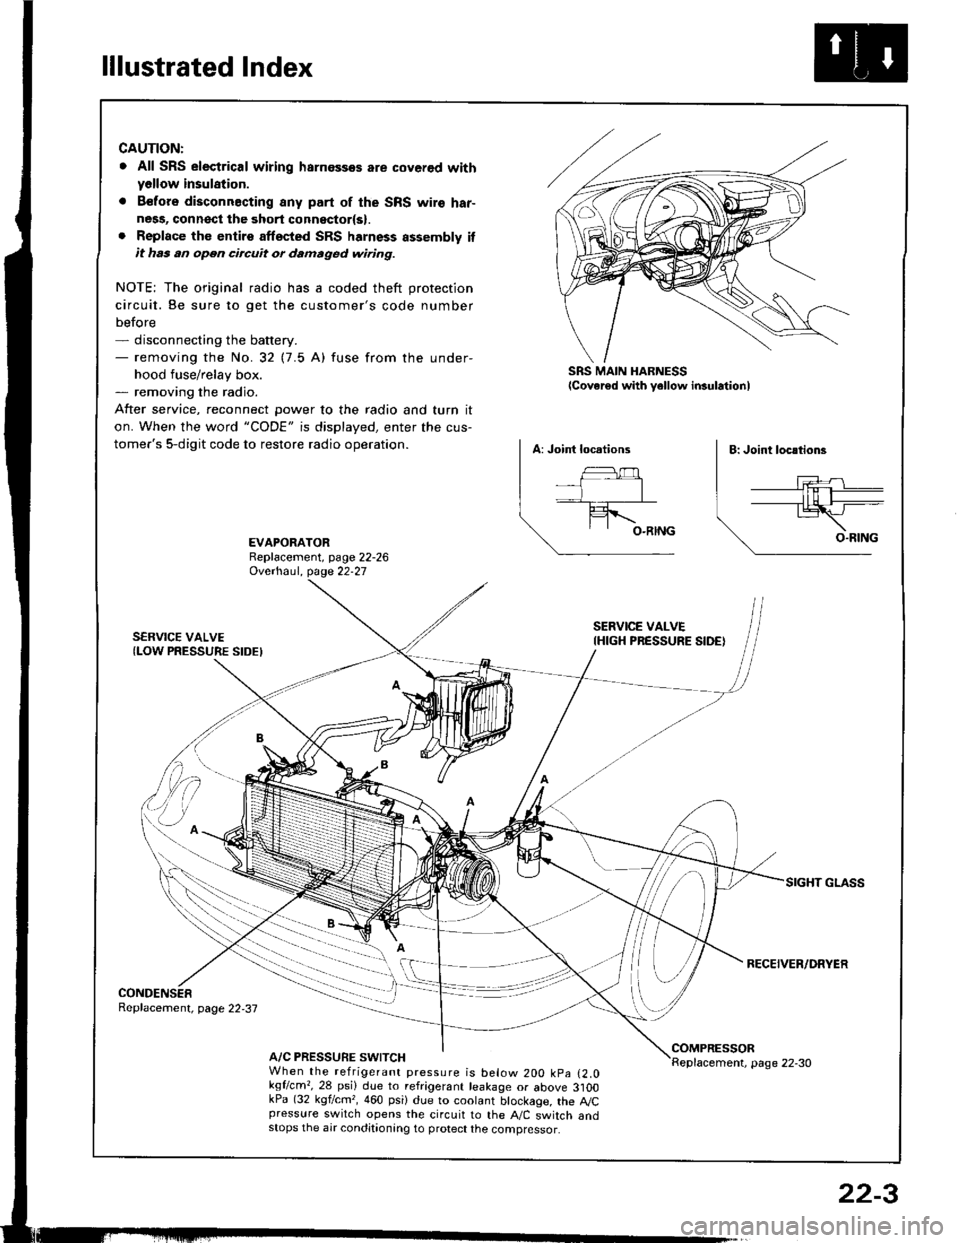 HONDA INTEGRA 1994 4.G Service Manual lllustrated Index
CAUTION:
. All SRS electrical wiring harnossos are cover€d withyellow insulation.
. B€fors disconnacting any part of the SRS wire har-ness, connsct the 3hort connsctor(s).. Repla